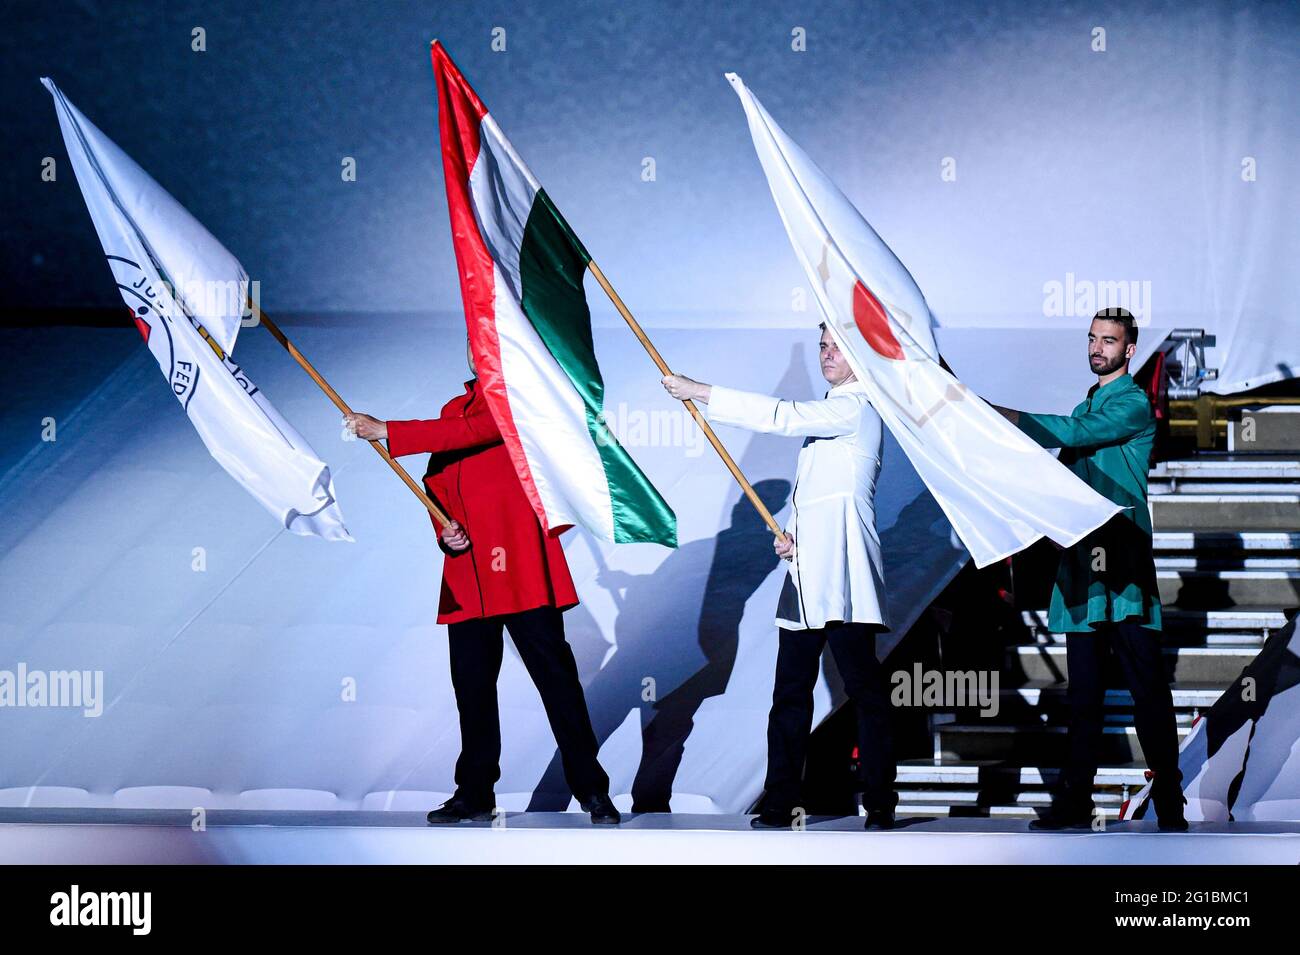 BUDAPEST, HUNGARY - JUNE 6: Offical Opening Ceremony of the World Judo Championships Hungary 2021 at Papp Laszlo Budapest Sports Arena on June 6, 2021 in Budapest, Hungary (Photo by Yannick Verhoeven/Orange Pictures) Stock Photo